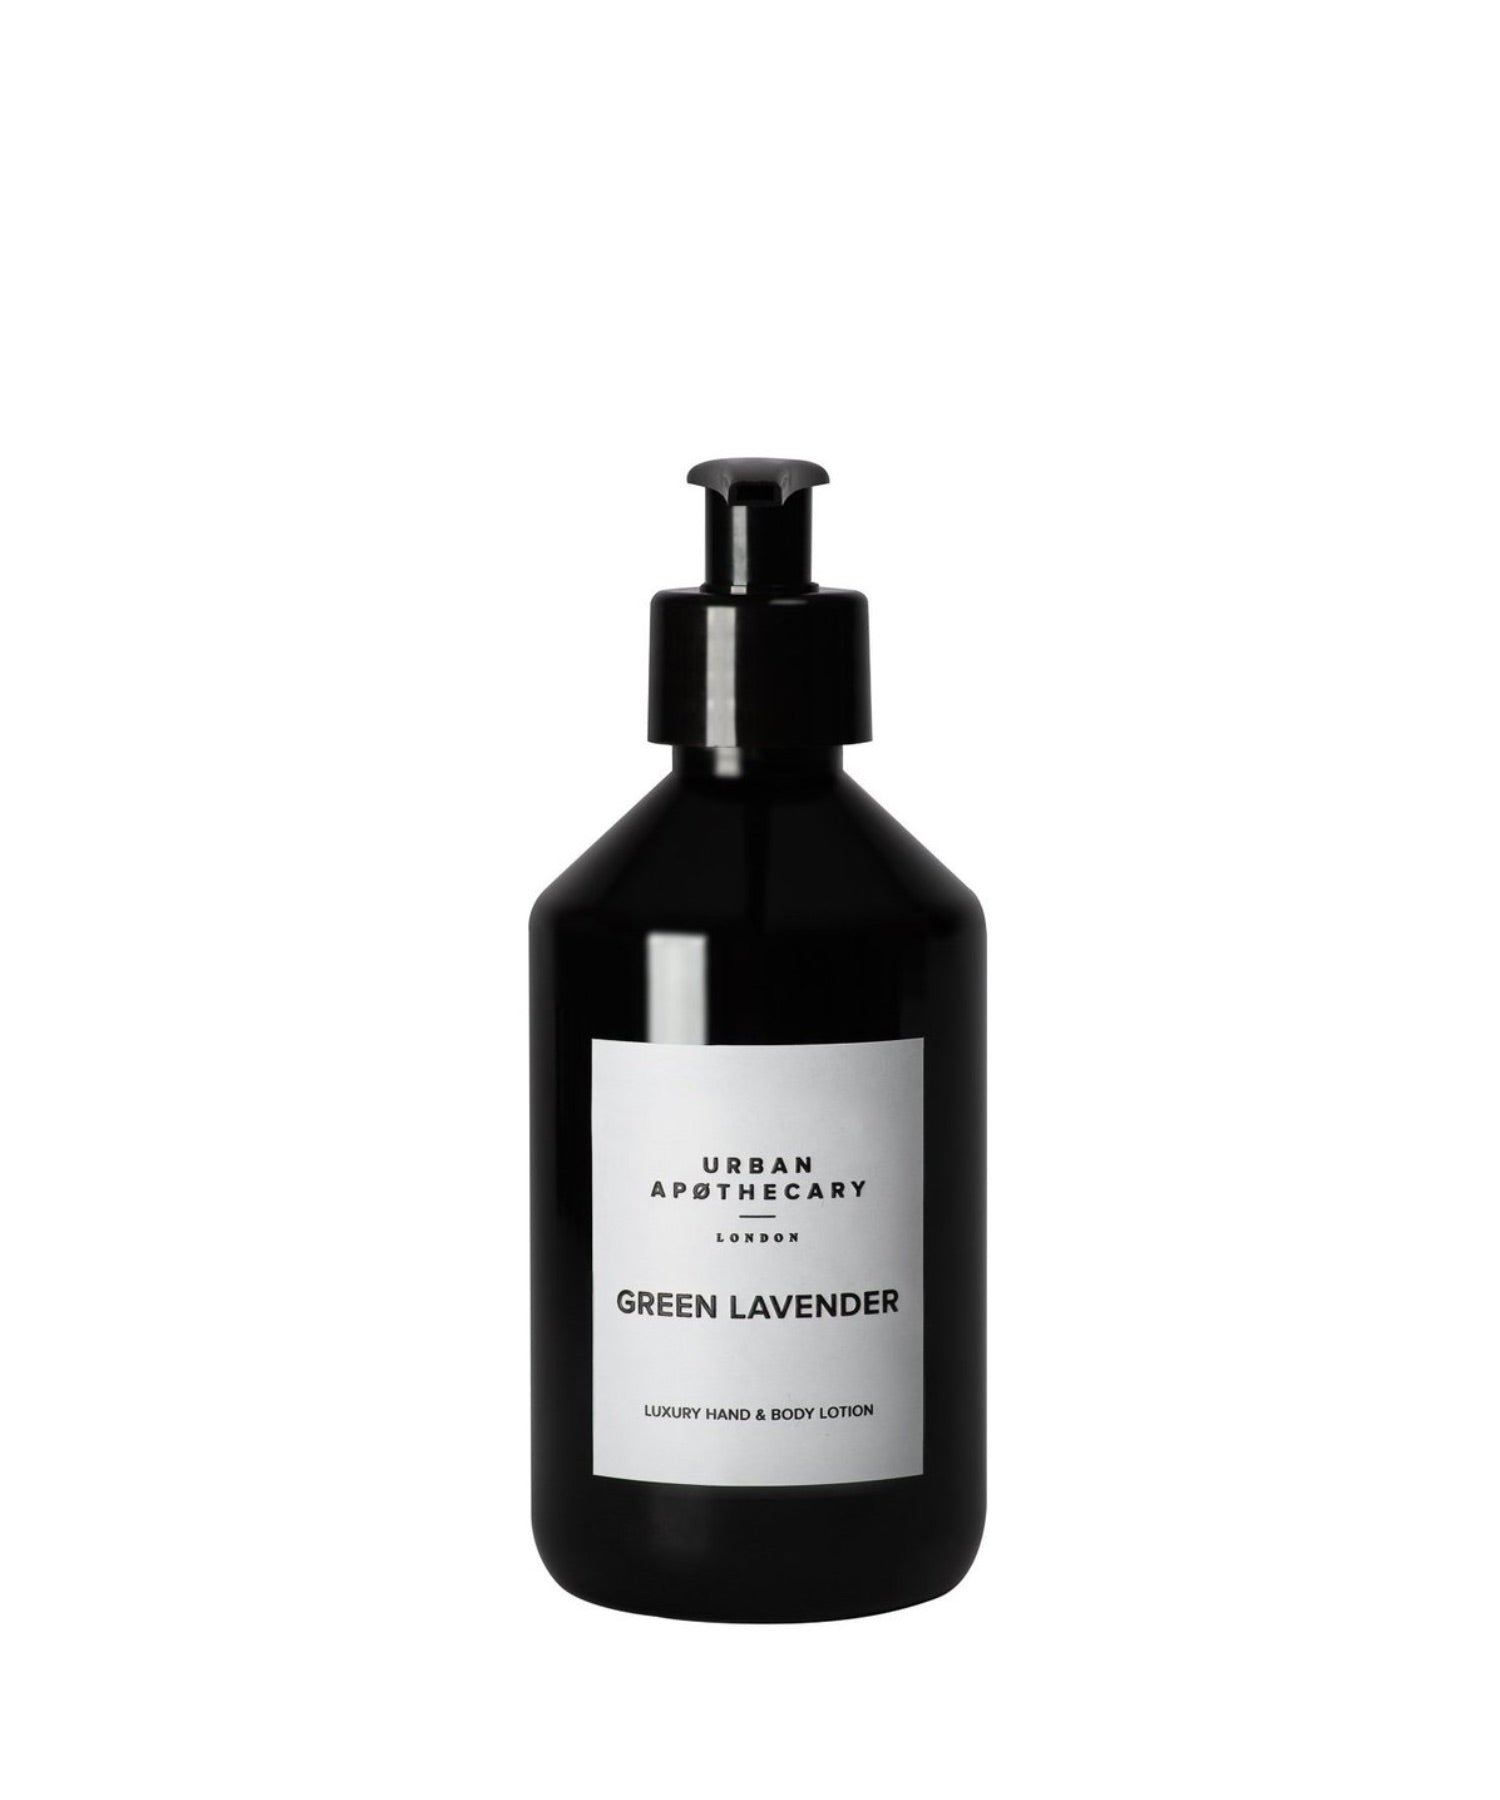 URBAN APOTHECARY Green Lavender Luxury Hand & Body Lotion 300 ml